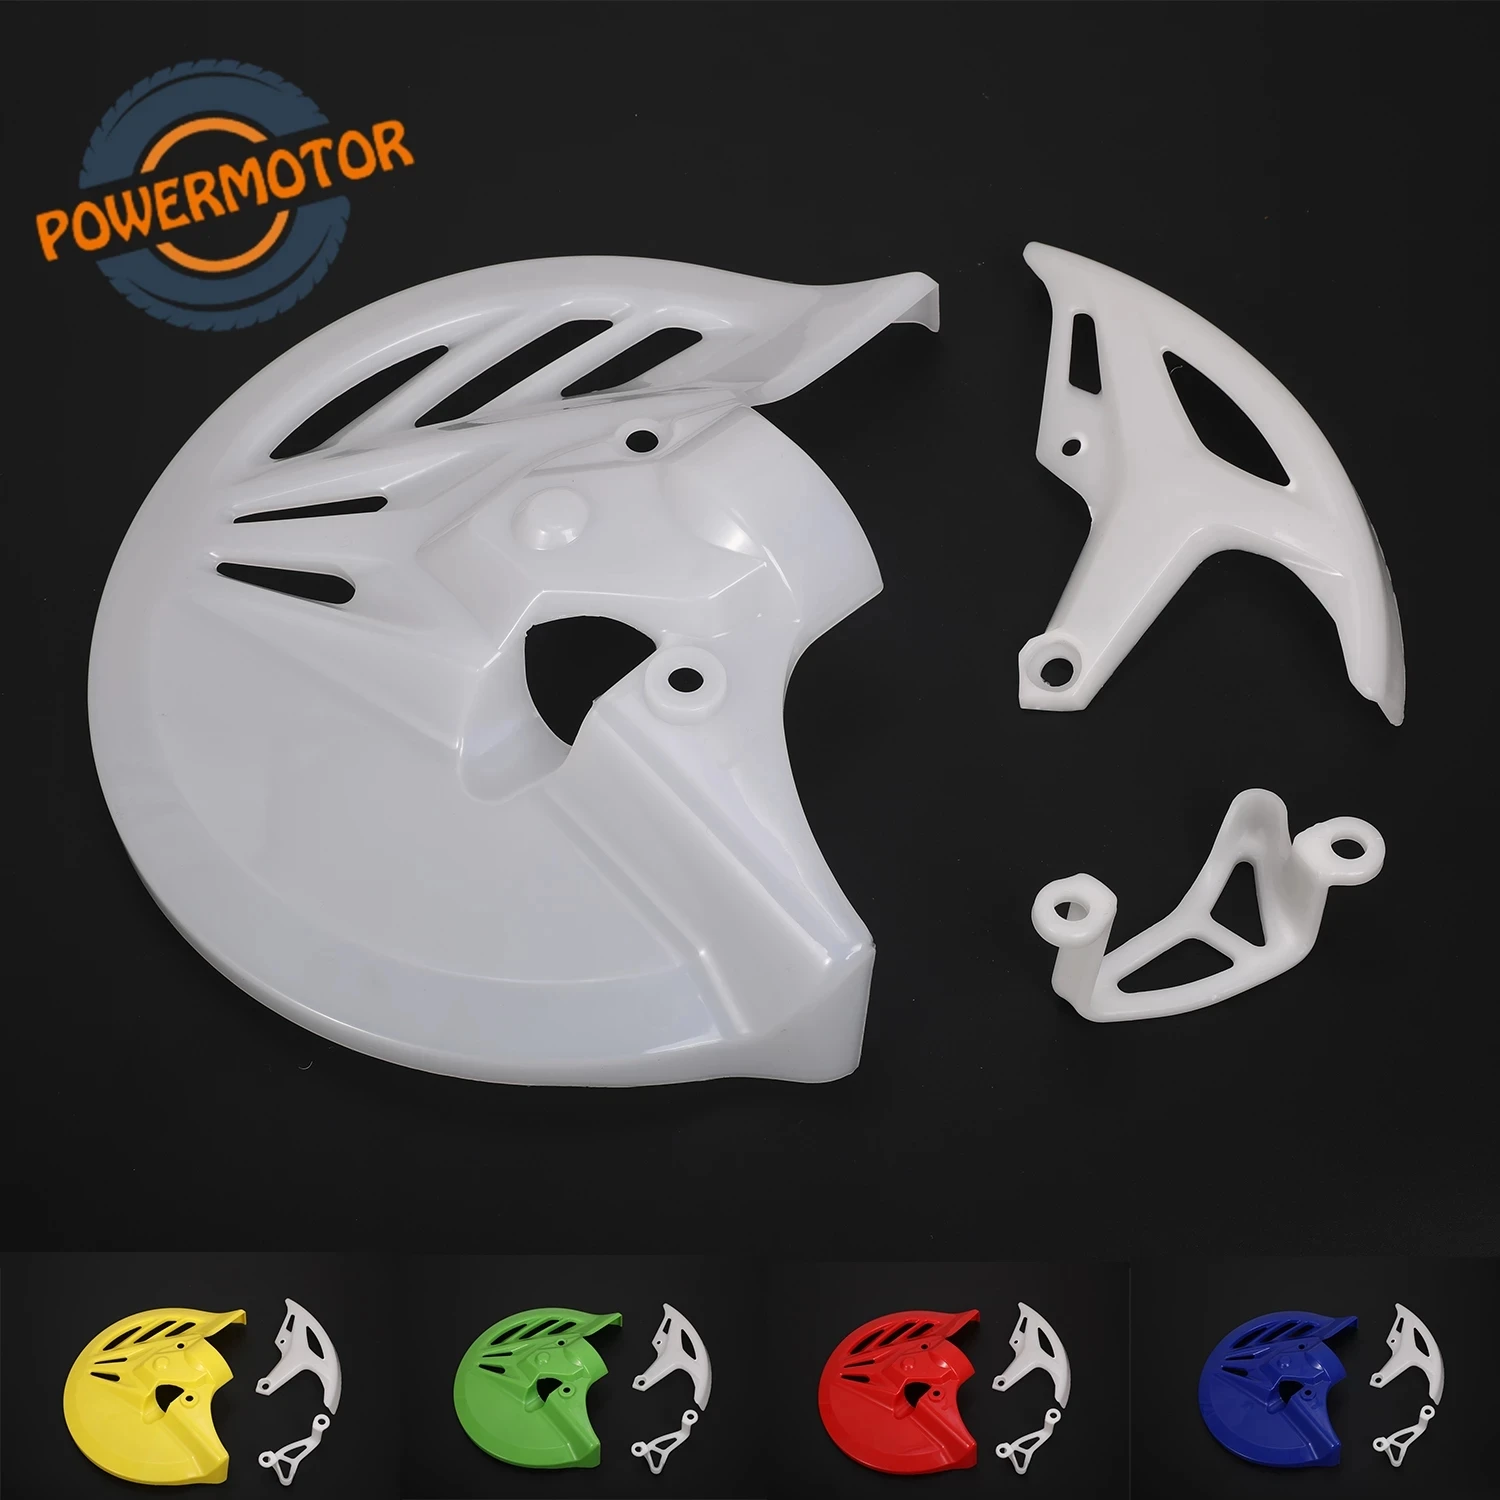 

Brake Disc Protective Cover Protective Plate Brake Protection Rear Calipers Cover For Honda CRF T4 T6 CRF 250 CRF 450 Dirt Bikes